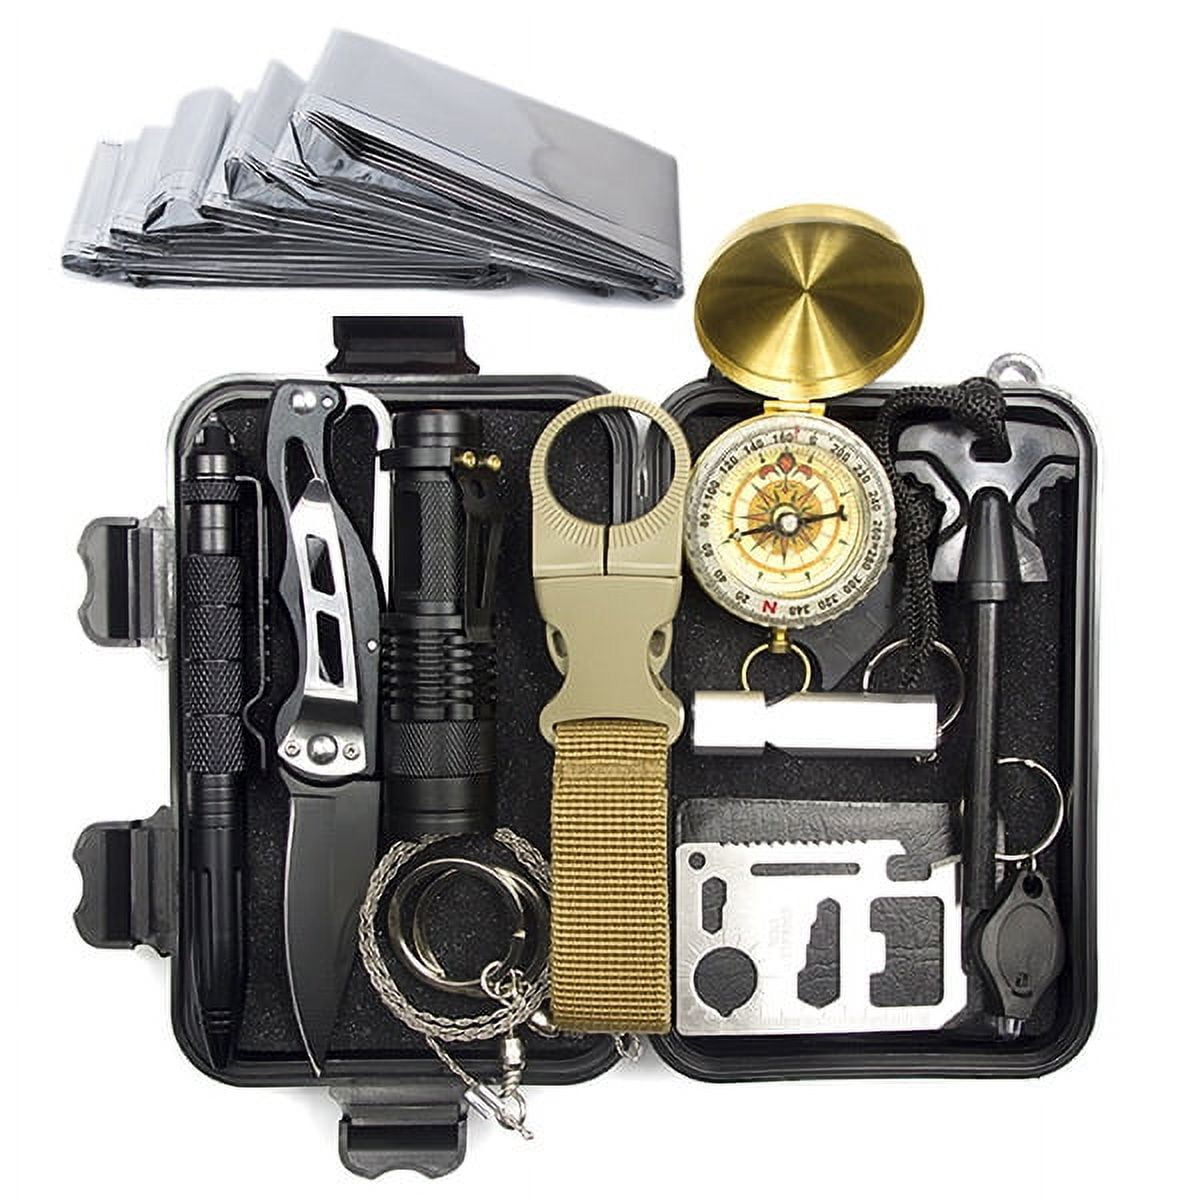 Black Friday deal: This 25-in-1 survival gear kit can be yours for $15  (Update: Sold out) - CNET